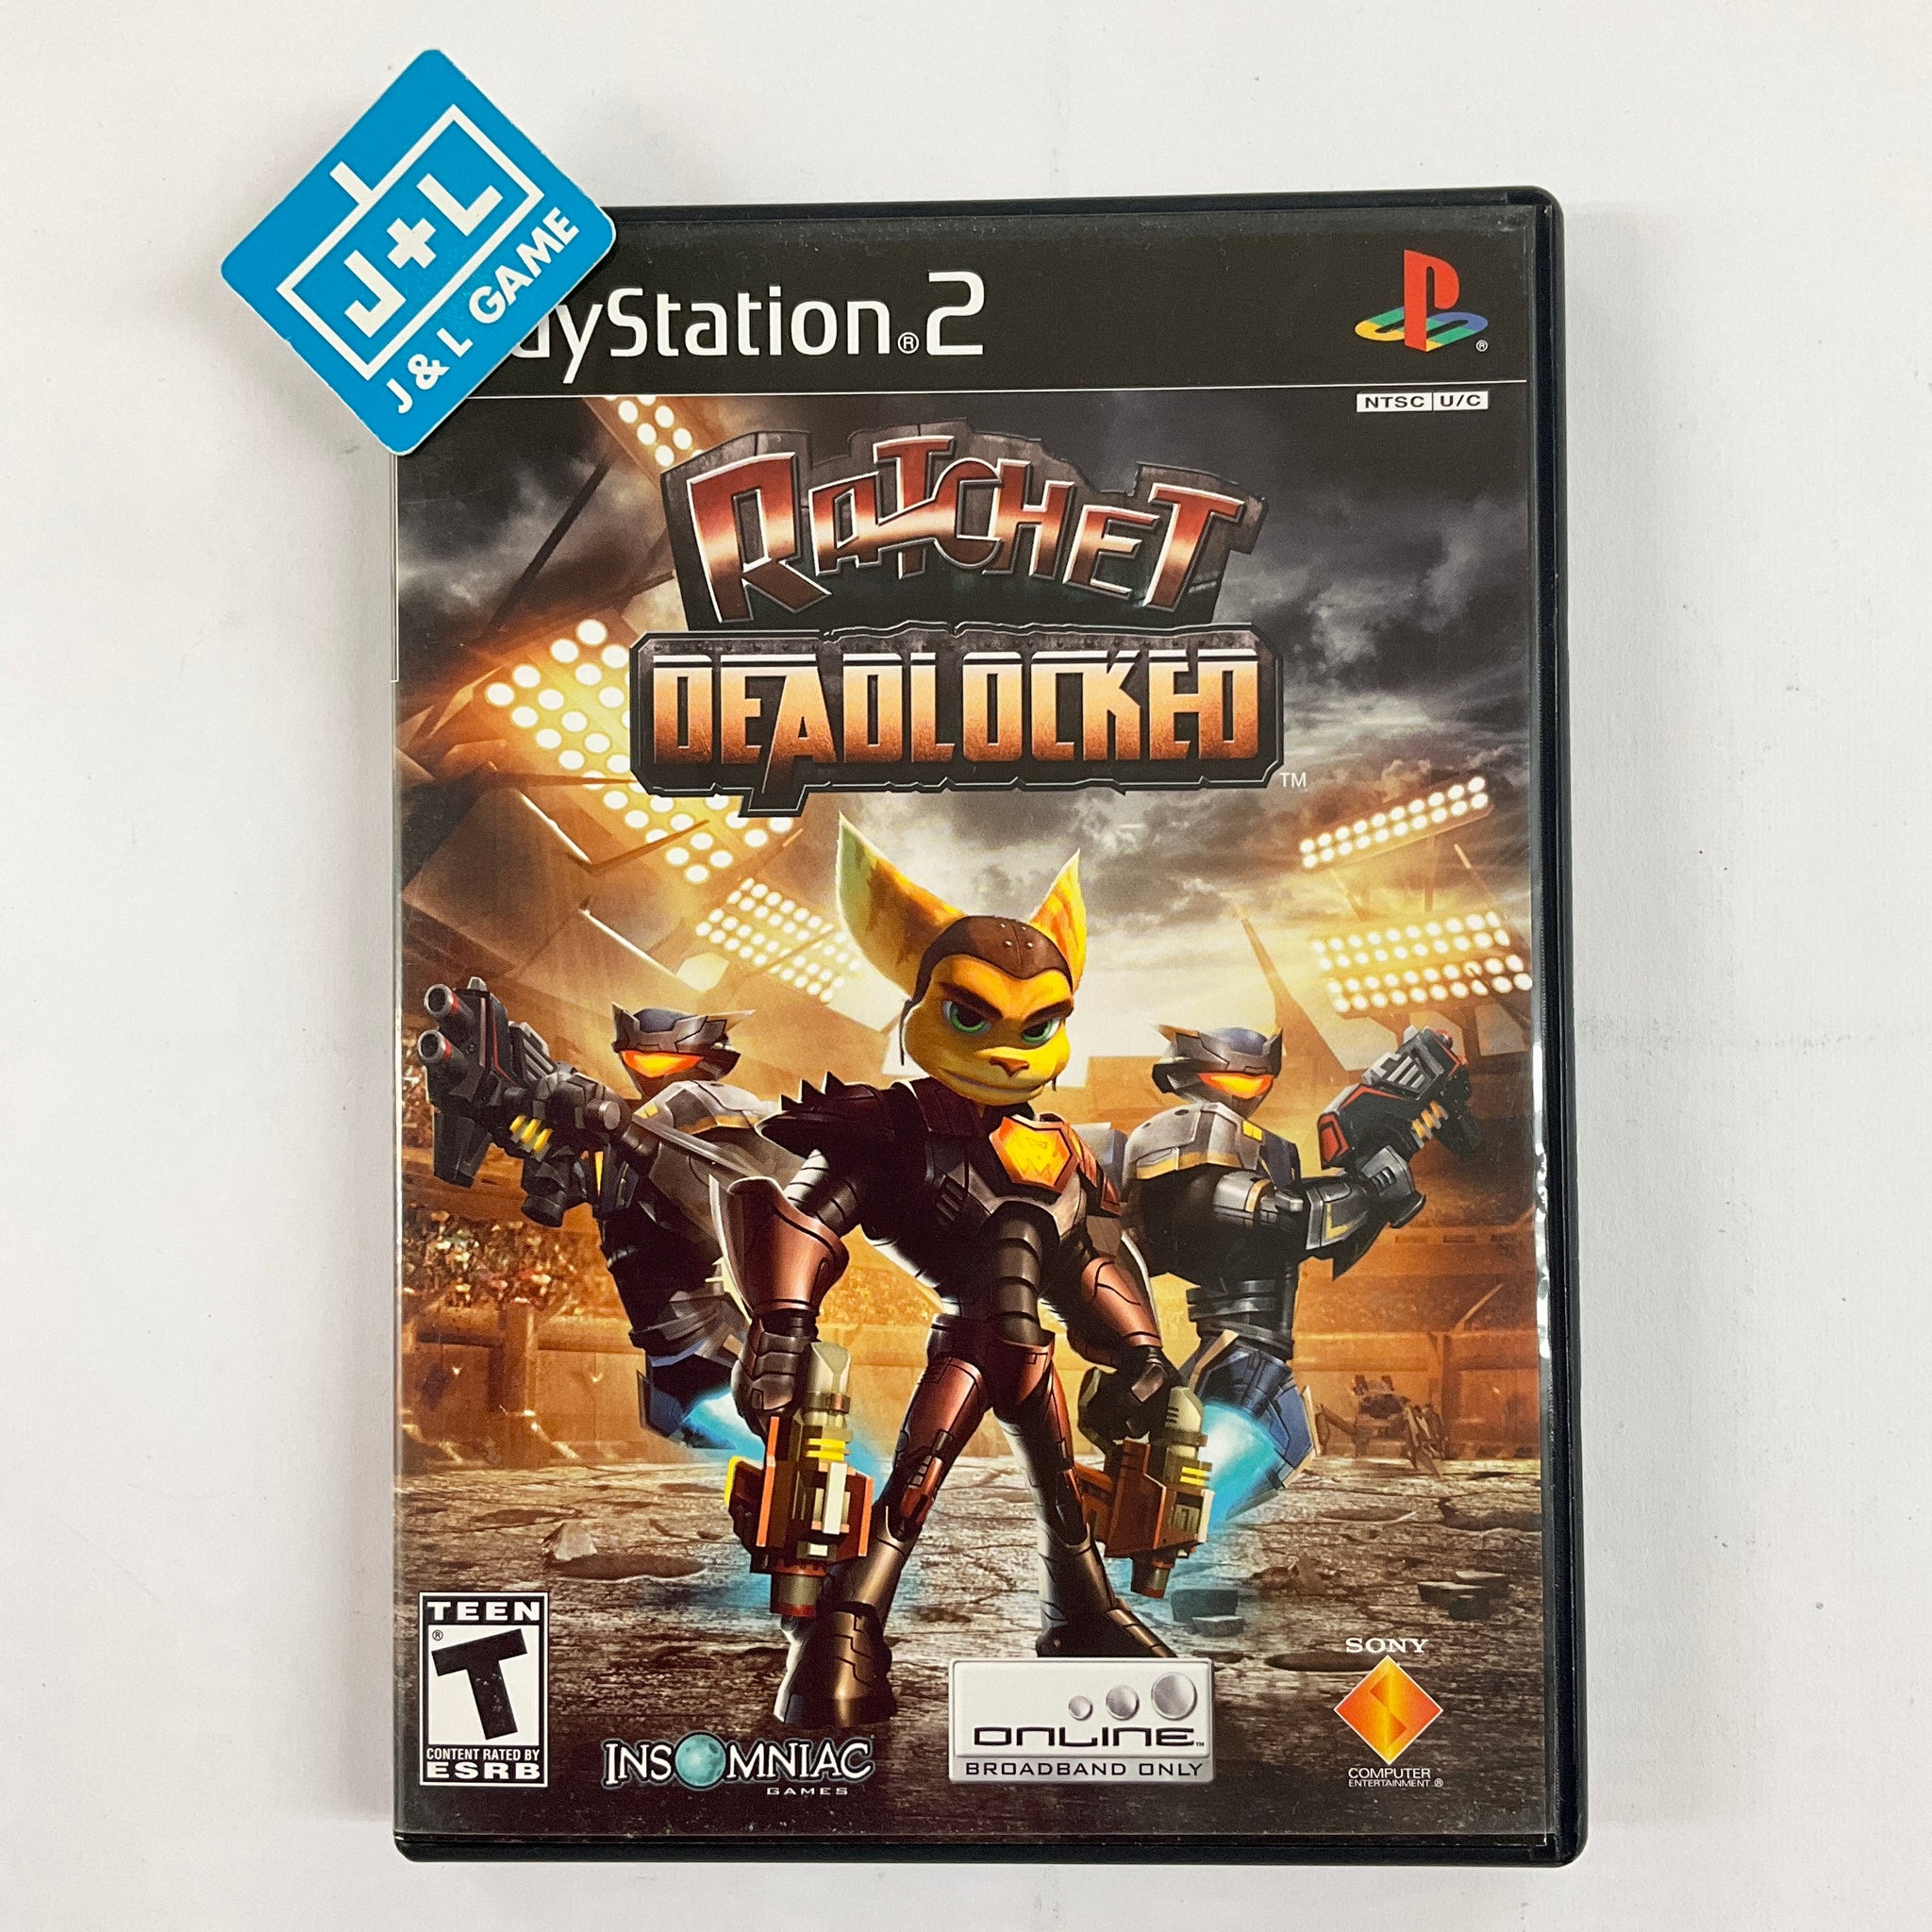 Ratchet & Clank Playstation 2 PS2 CASE ONLY